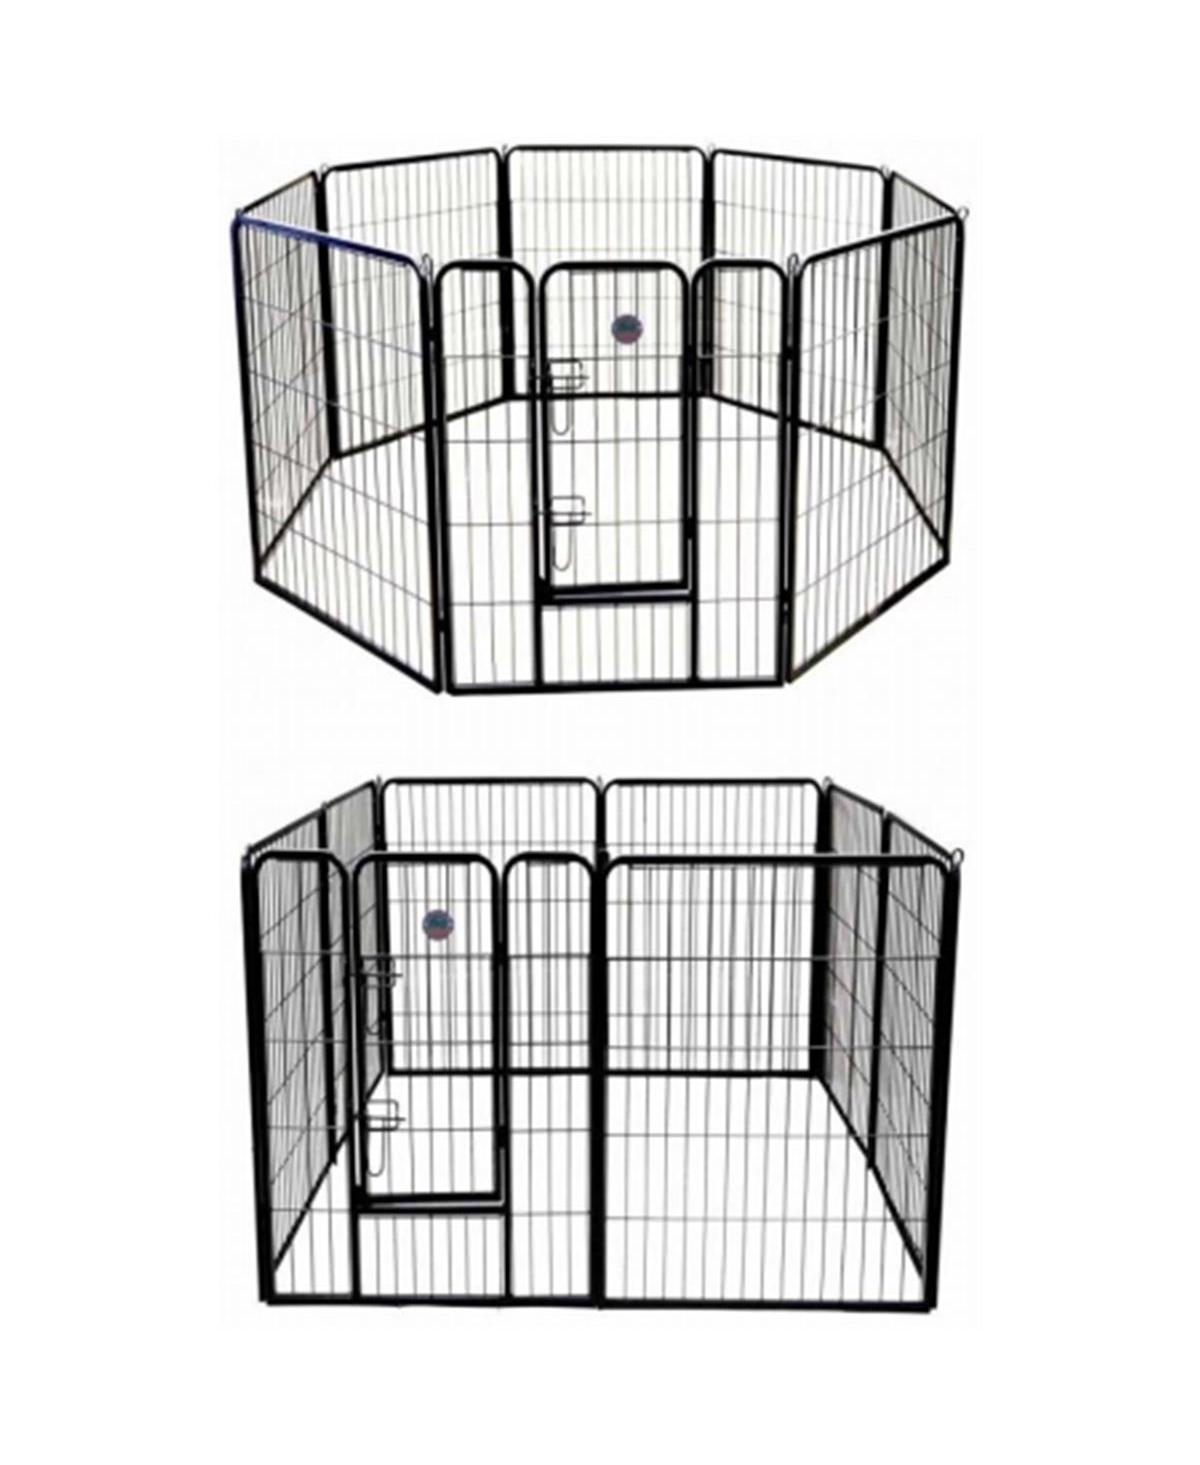 GH24 24 in. Heavy Duty Pet Play And Exercise Pen With 8 Panels - Open miscellaneous